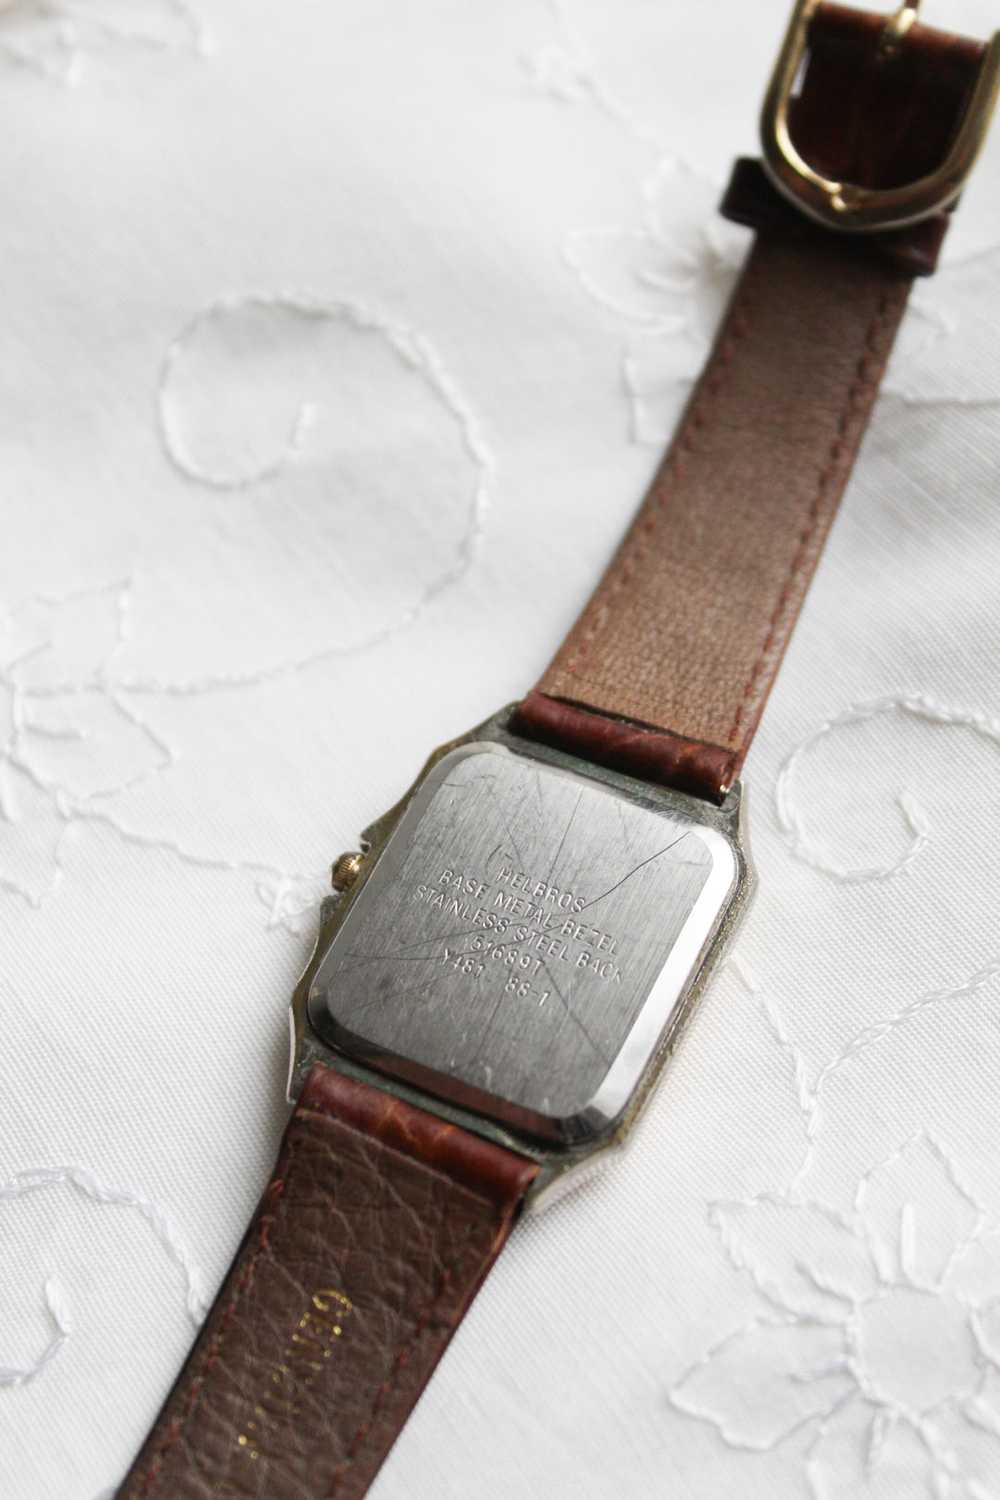 leather band vintage watch - image 3